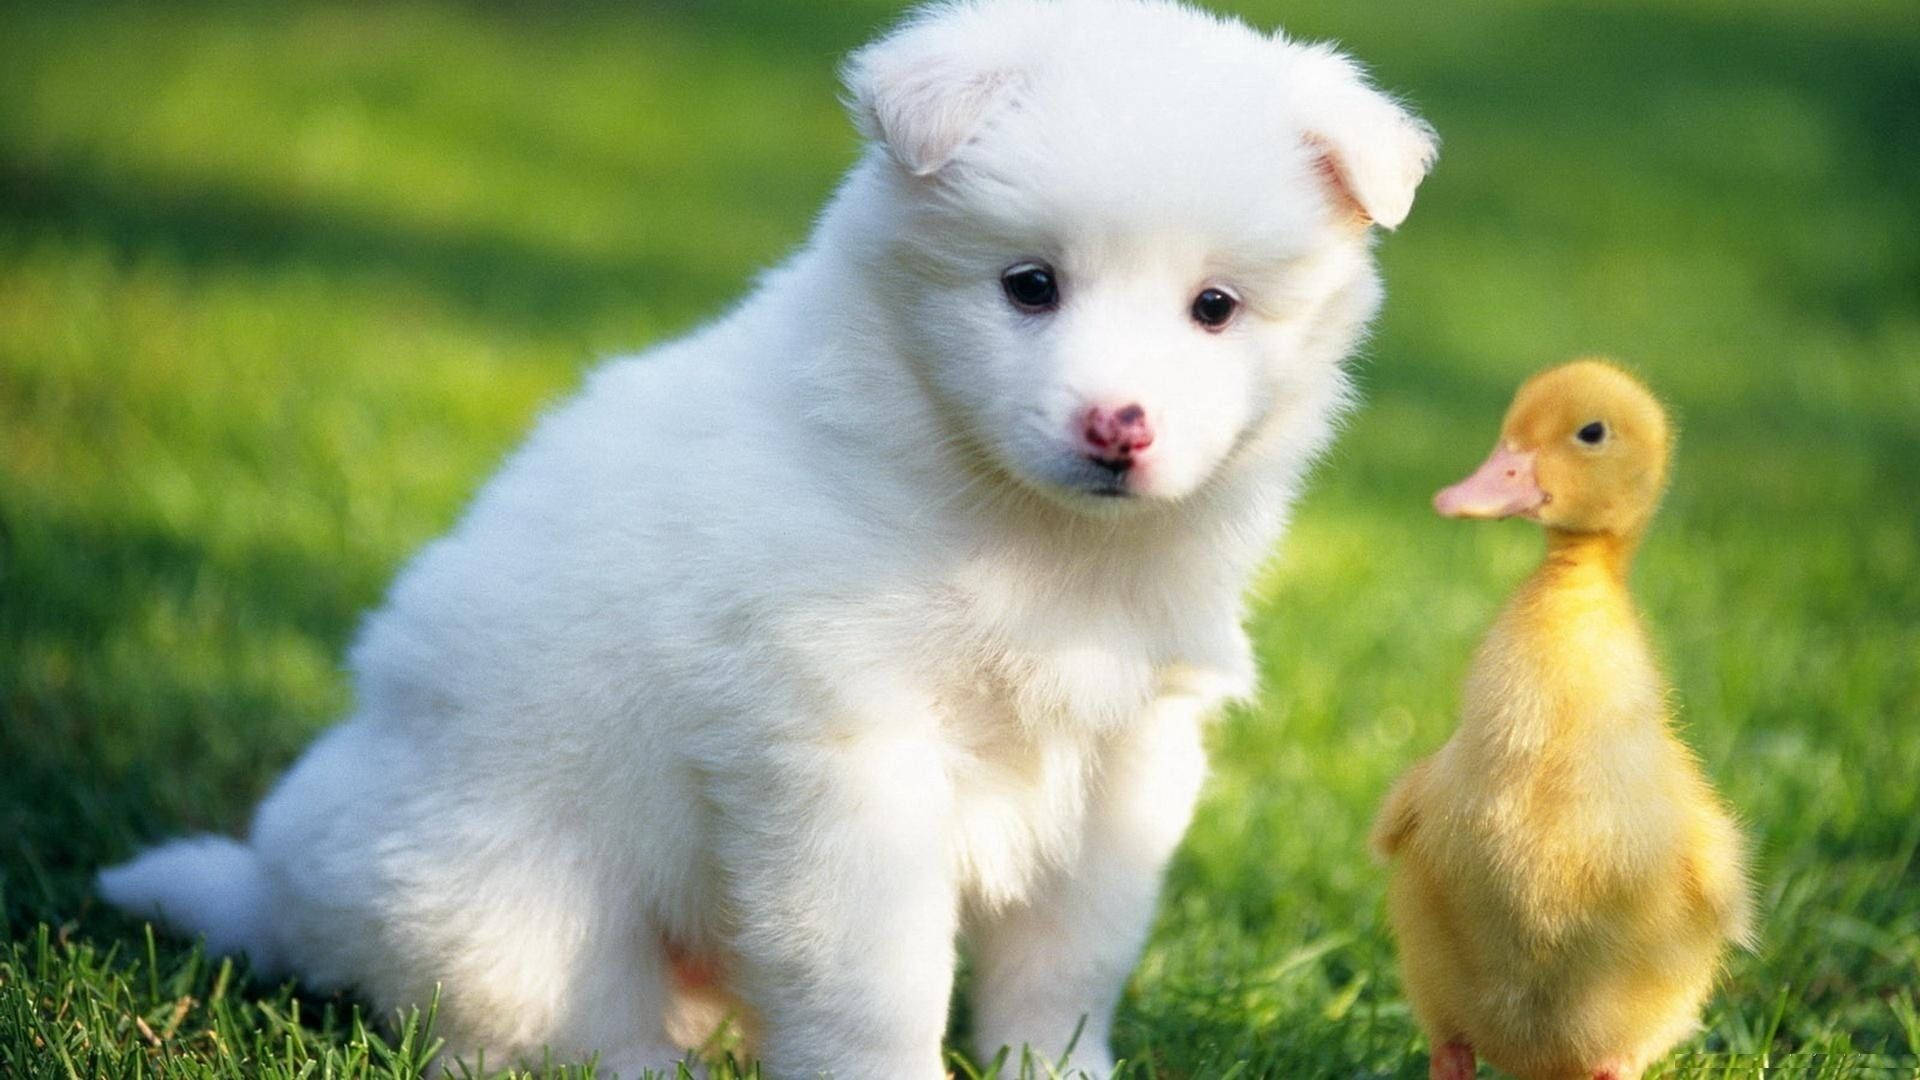 Baby Duck With Dog